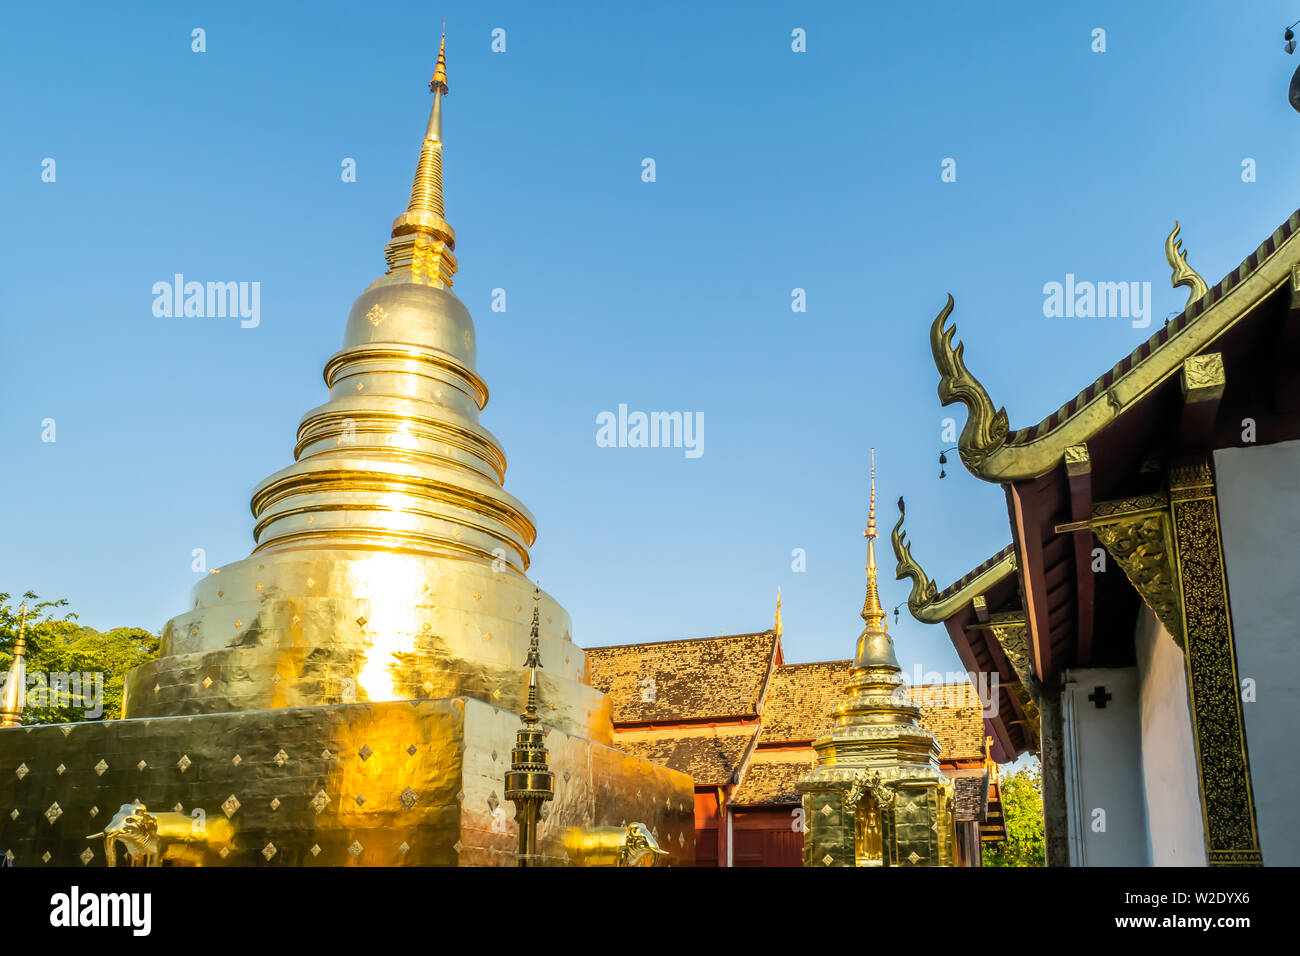 View of Wat Phra Singh with the golden pagoda, the popular historical landmark temple in Chiang Mai, Thailand Stock Photo